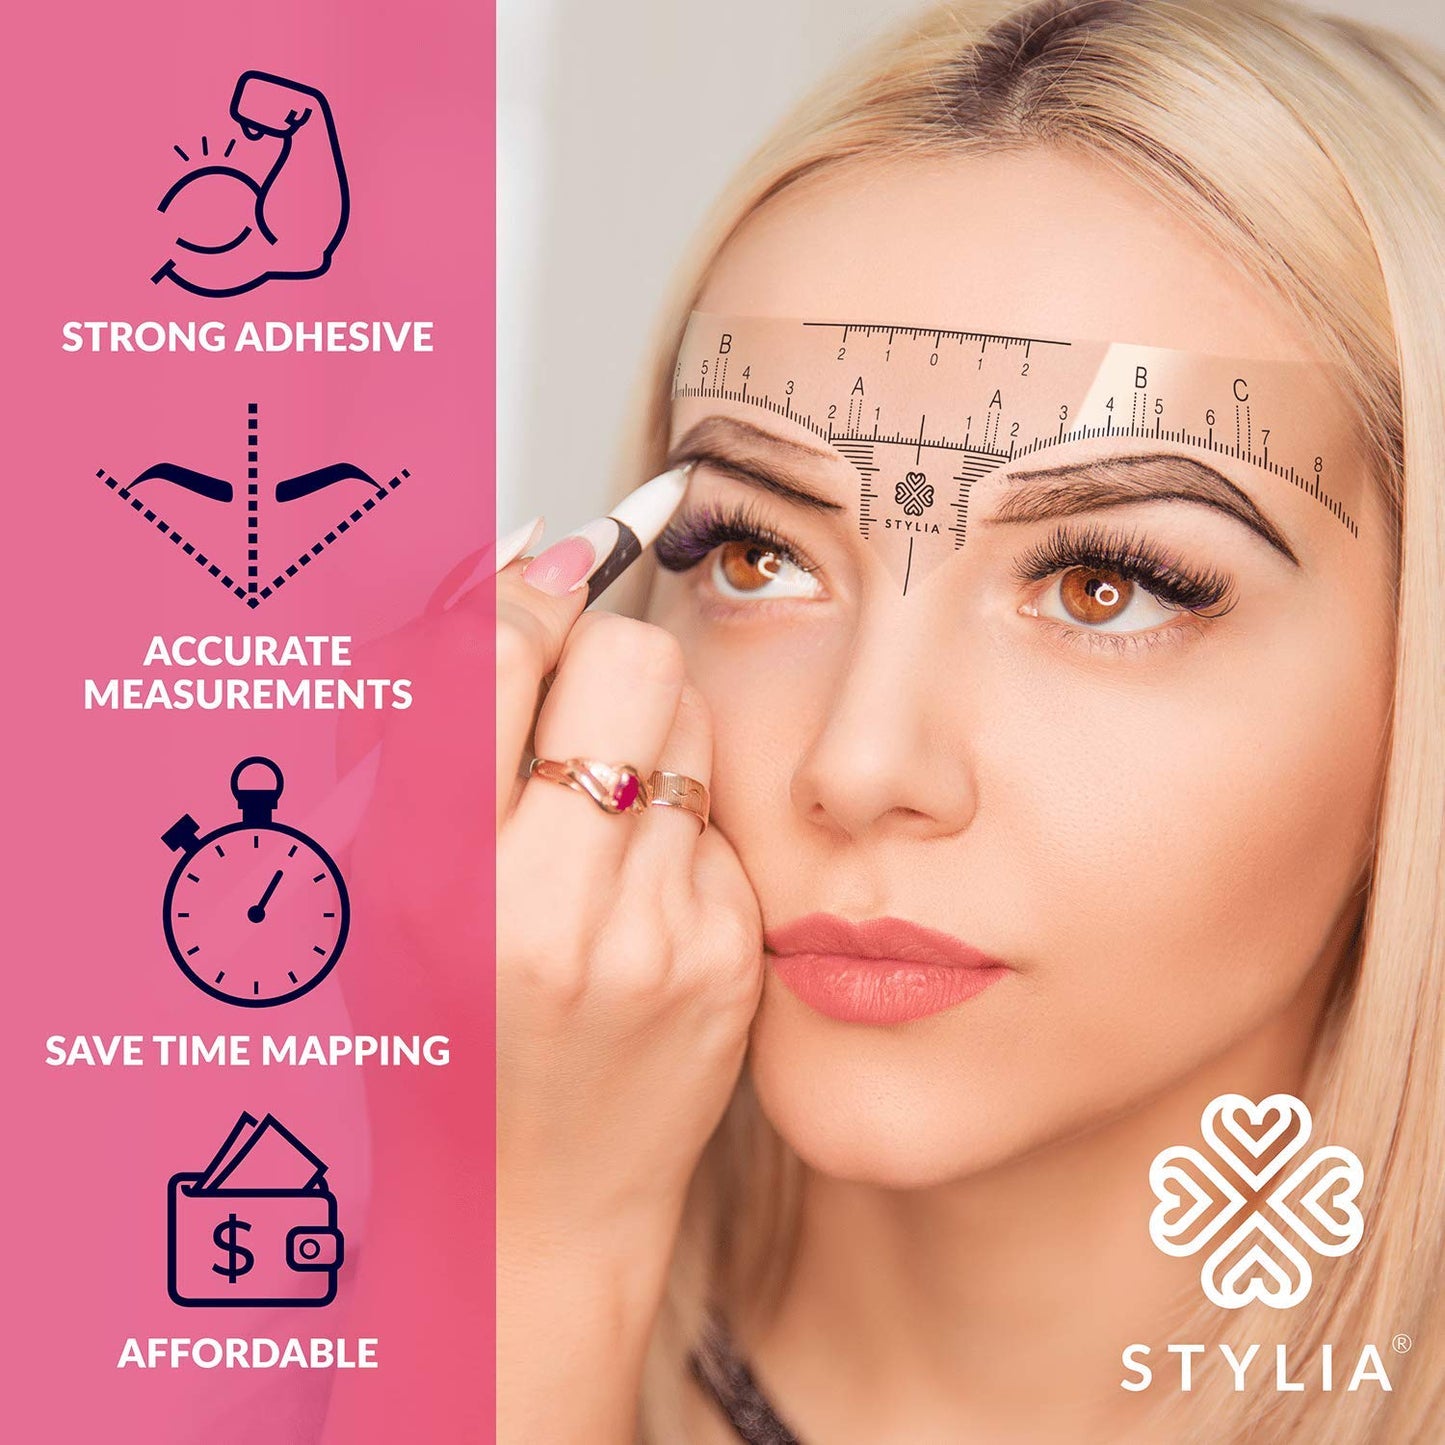 Disposable Eyebrow Ruler Stencils - Transparent Mapping Stickers pack of 100